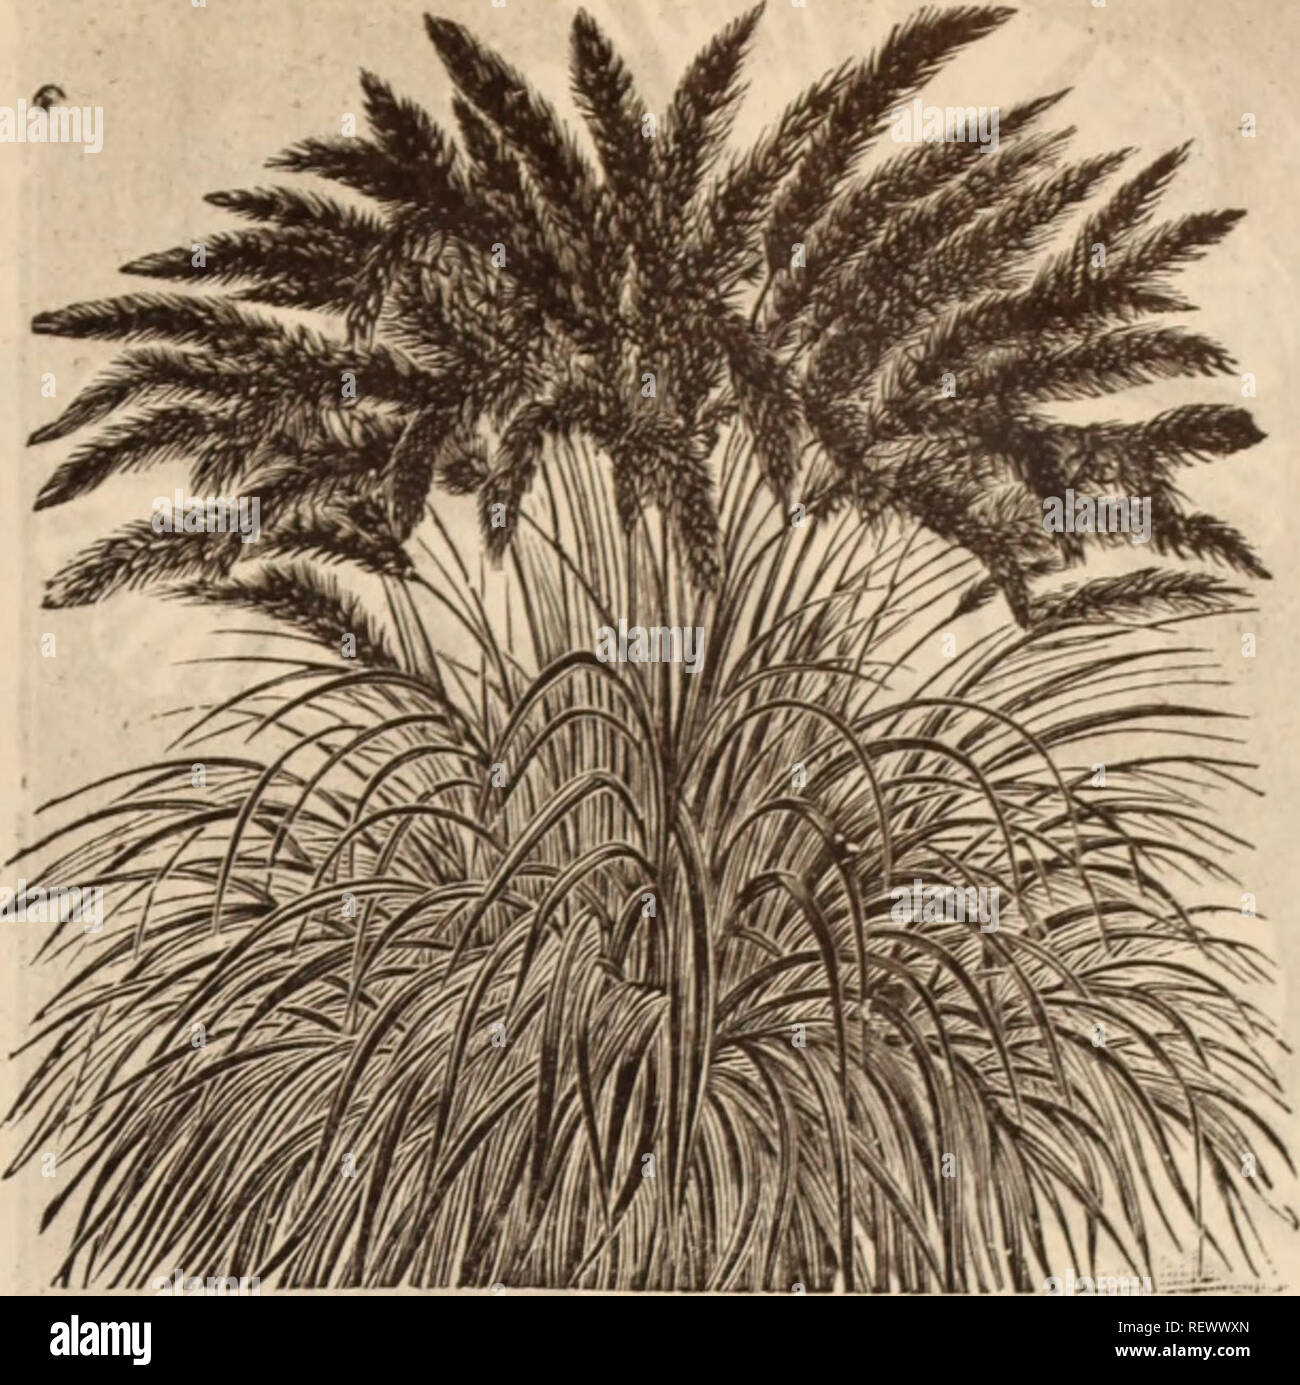 . Dreer's wholesale price list / Henry A. Dreer.. Nursery Catalogue. PENNISETUM RUEPPELIANUM Gloxinia. Our supply of these are from world-renowned sources and can- not fail to give satisfactory results. Tr. pkt. Hybrida grandiflora, choicest mixed; all kinds ... 75 Gourds, Ornamental. Oz. 20 15 15 15 15 15 Mixed varieties. 30 cts. per '/i-lb African Pipe - . Apple=shaped â¢ . Bottle=shaped Calabash or Dipper White Egg Hercules' Club â . Orange Pear-shaped Dish=rag or Sponge Spoon . Turks' Turban . . Warted Godetia. Brilliant. Carmine rose . Duchess of Albany. White Gloriosa. Rich blood-red . R Stock Photo